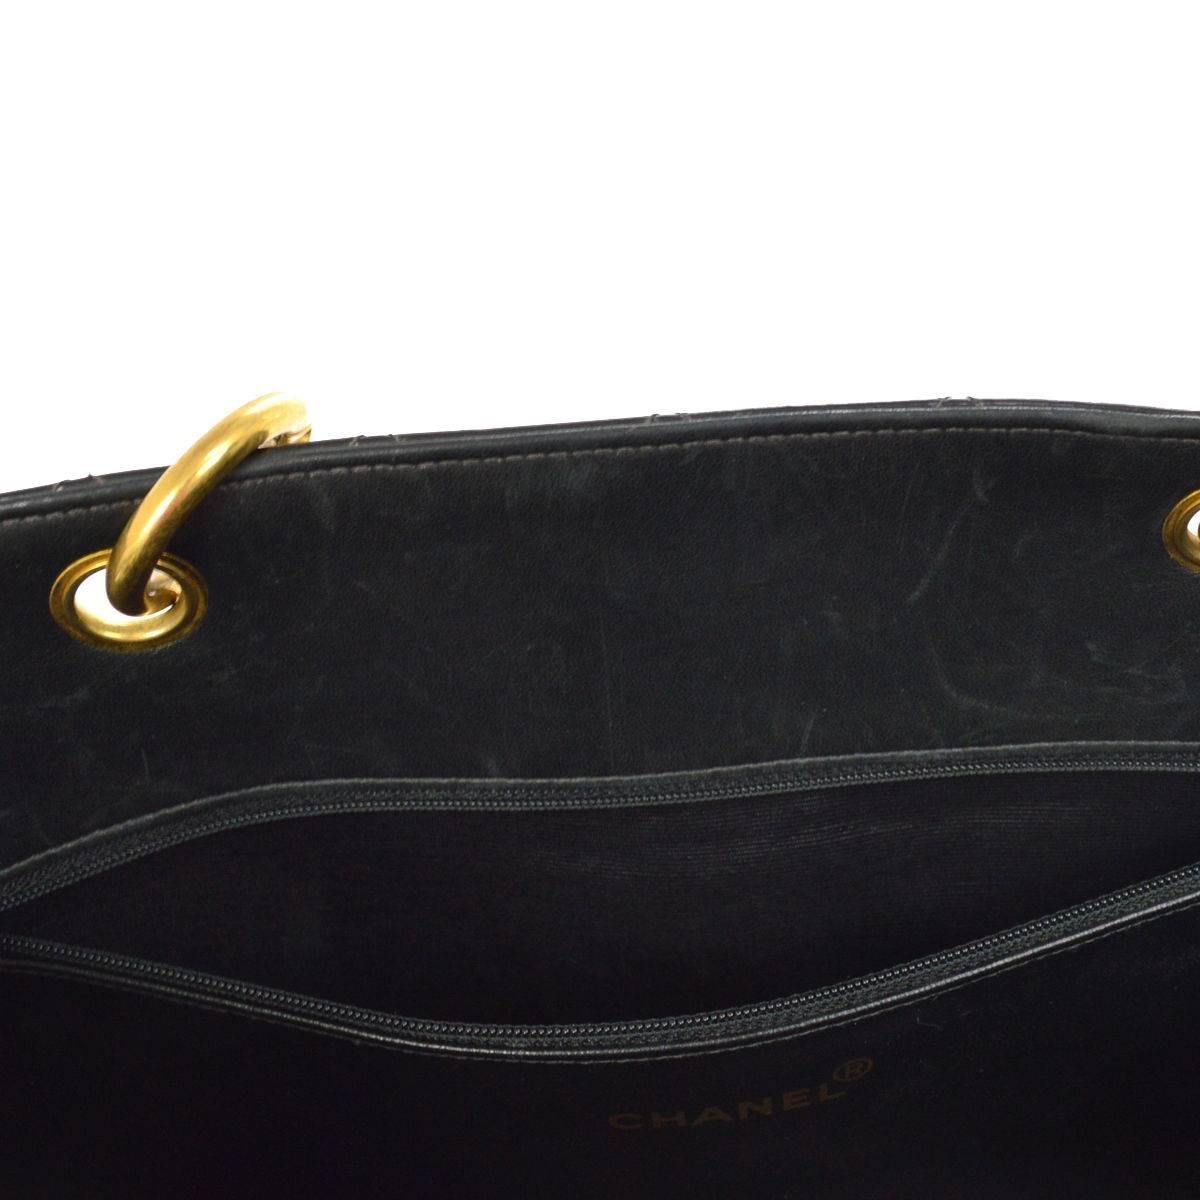 Chanel Black Patent Leather Gold Accent Large Weekender Travel Carryall Tote Bag 4